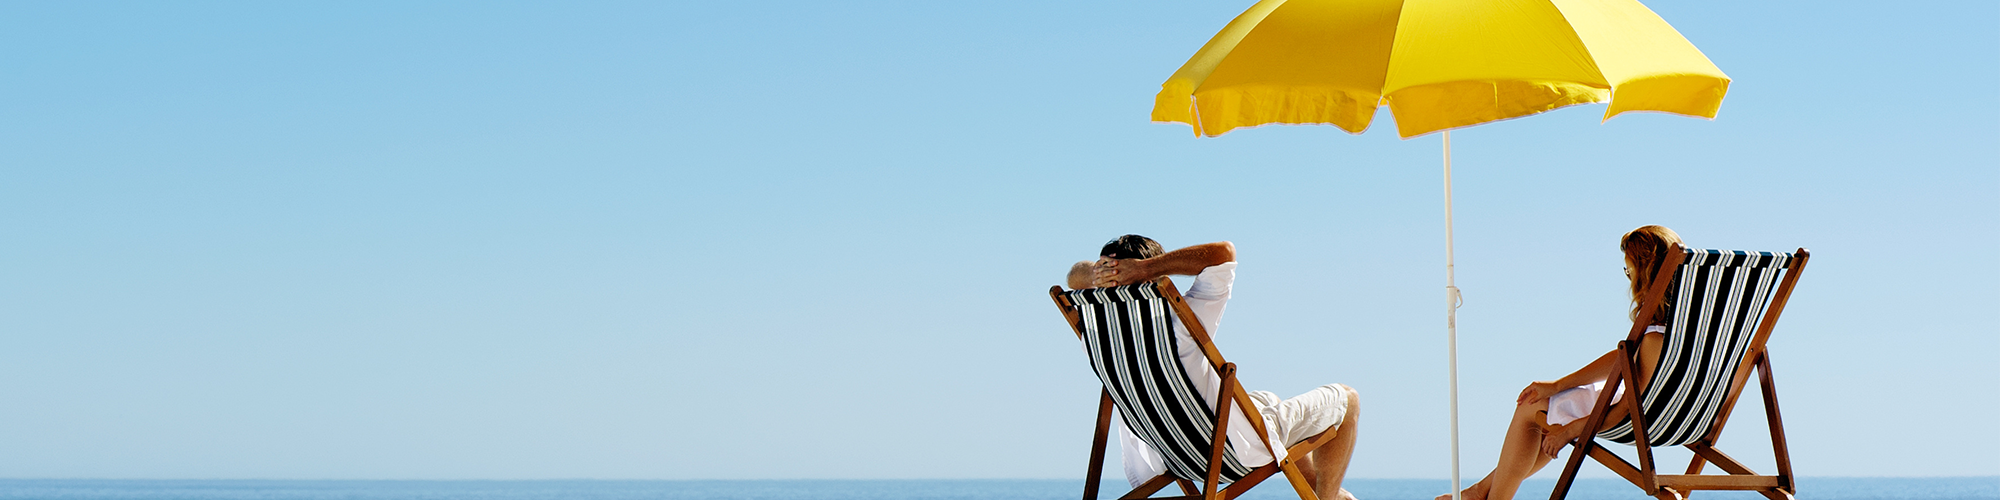 Couple sitting in beach chairs beside eachother with yellow umbrella in between them and wave in the background